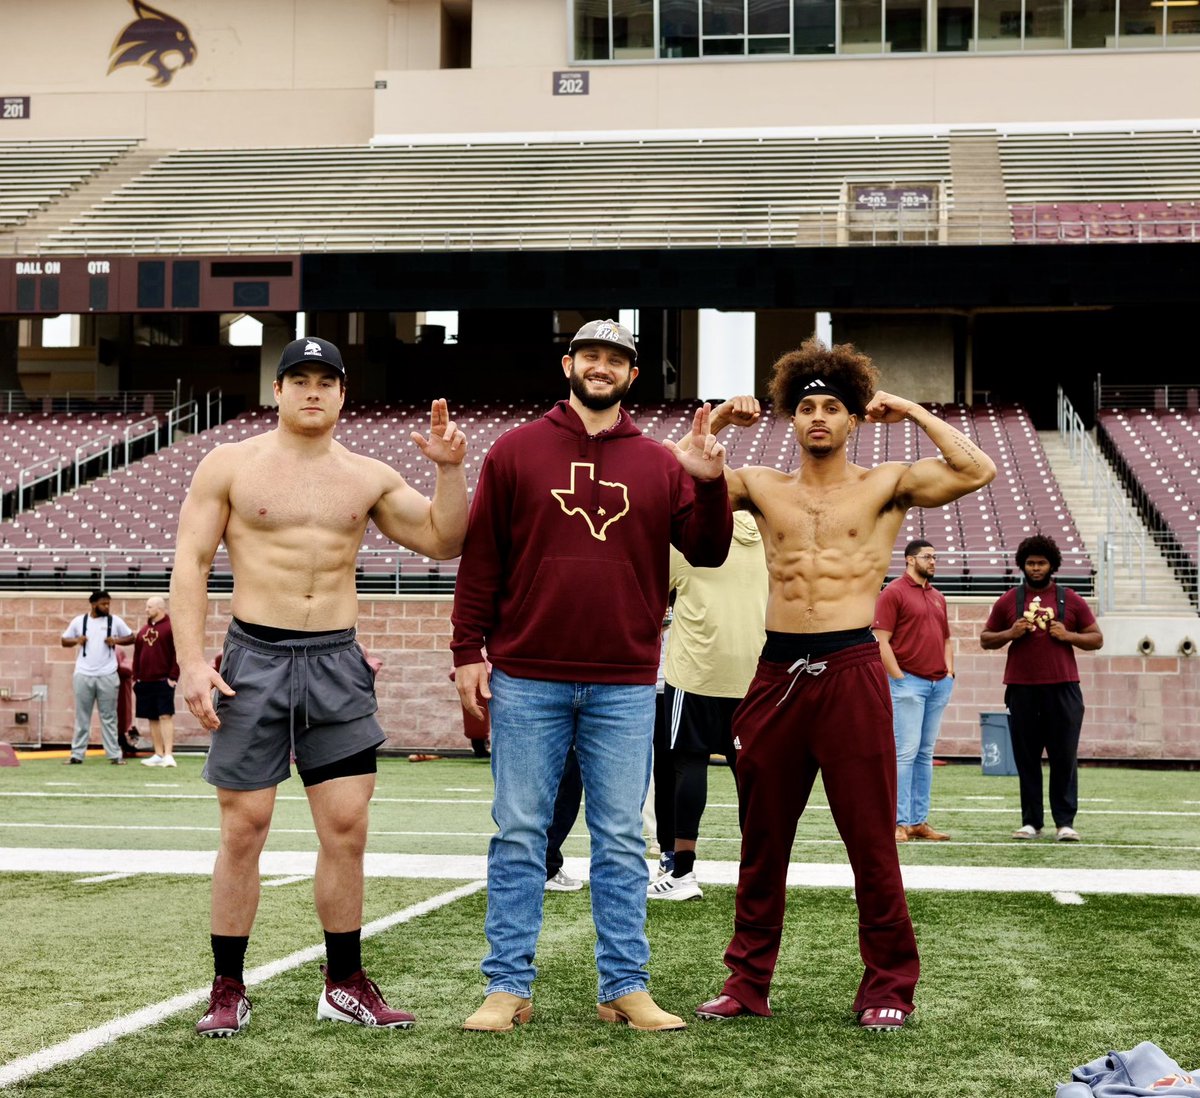 Love these guys right here! Special group that made history for @TXSTATEFOOTBALL ! The scouts were impressed with how they performed .. #TakeBackTexas #ProCats